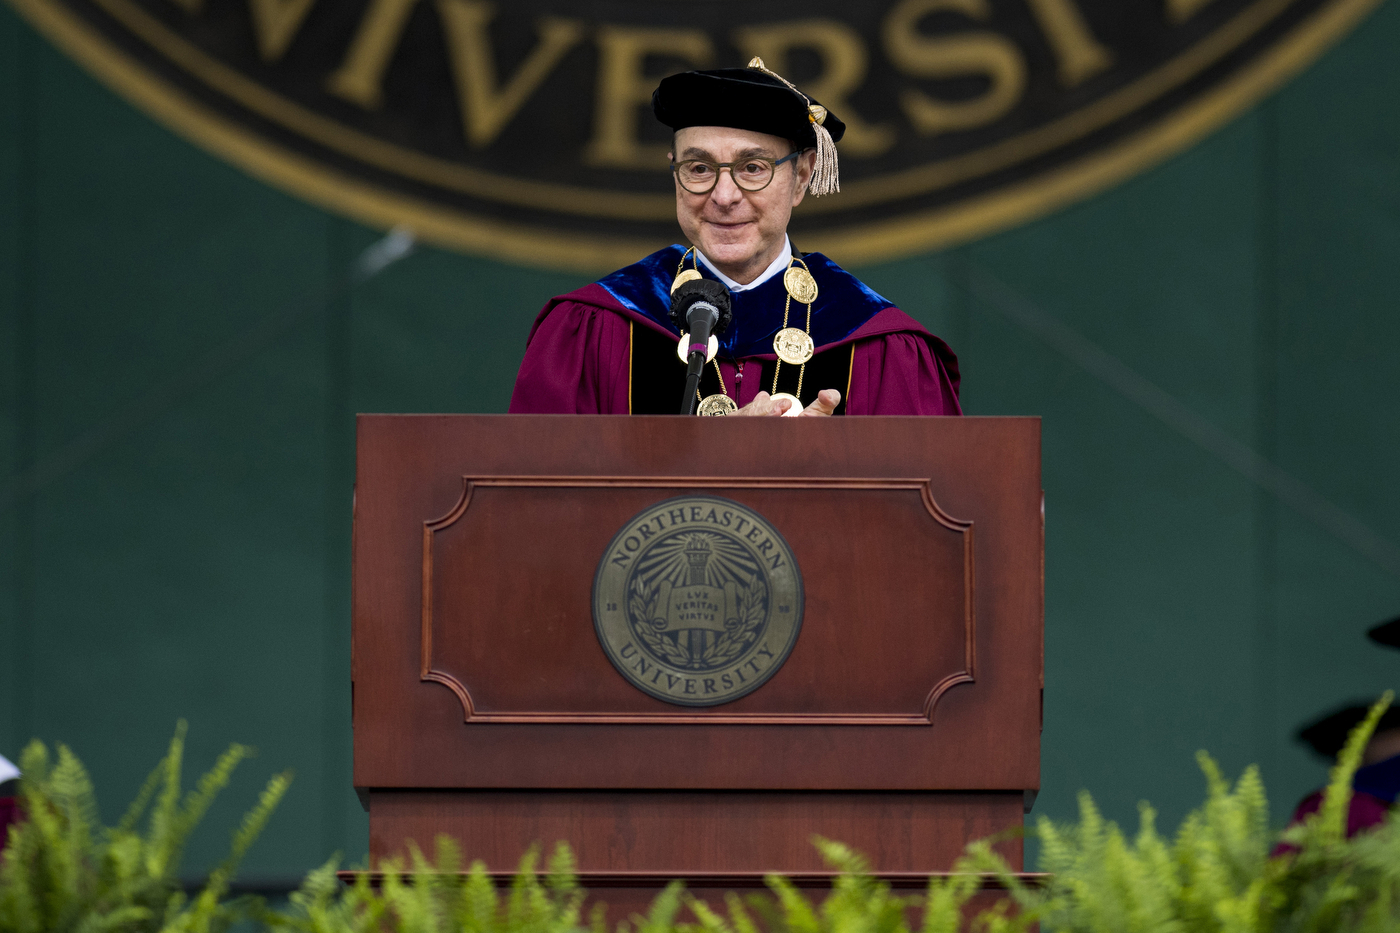 ‘Your class, perhaps more than any other, is prepared for whatever comes next,’ said Joseph E. Aoun, president of Northeastern. Photos by Matthew Modoono,/Northeastern University